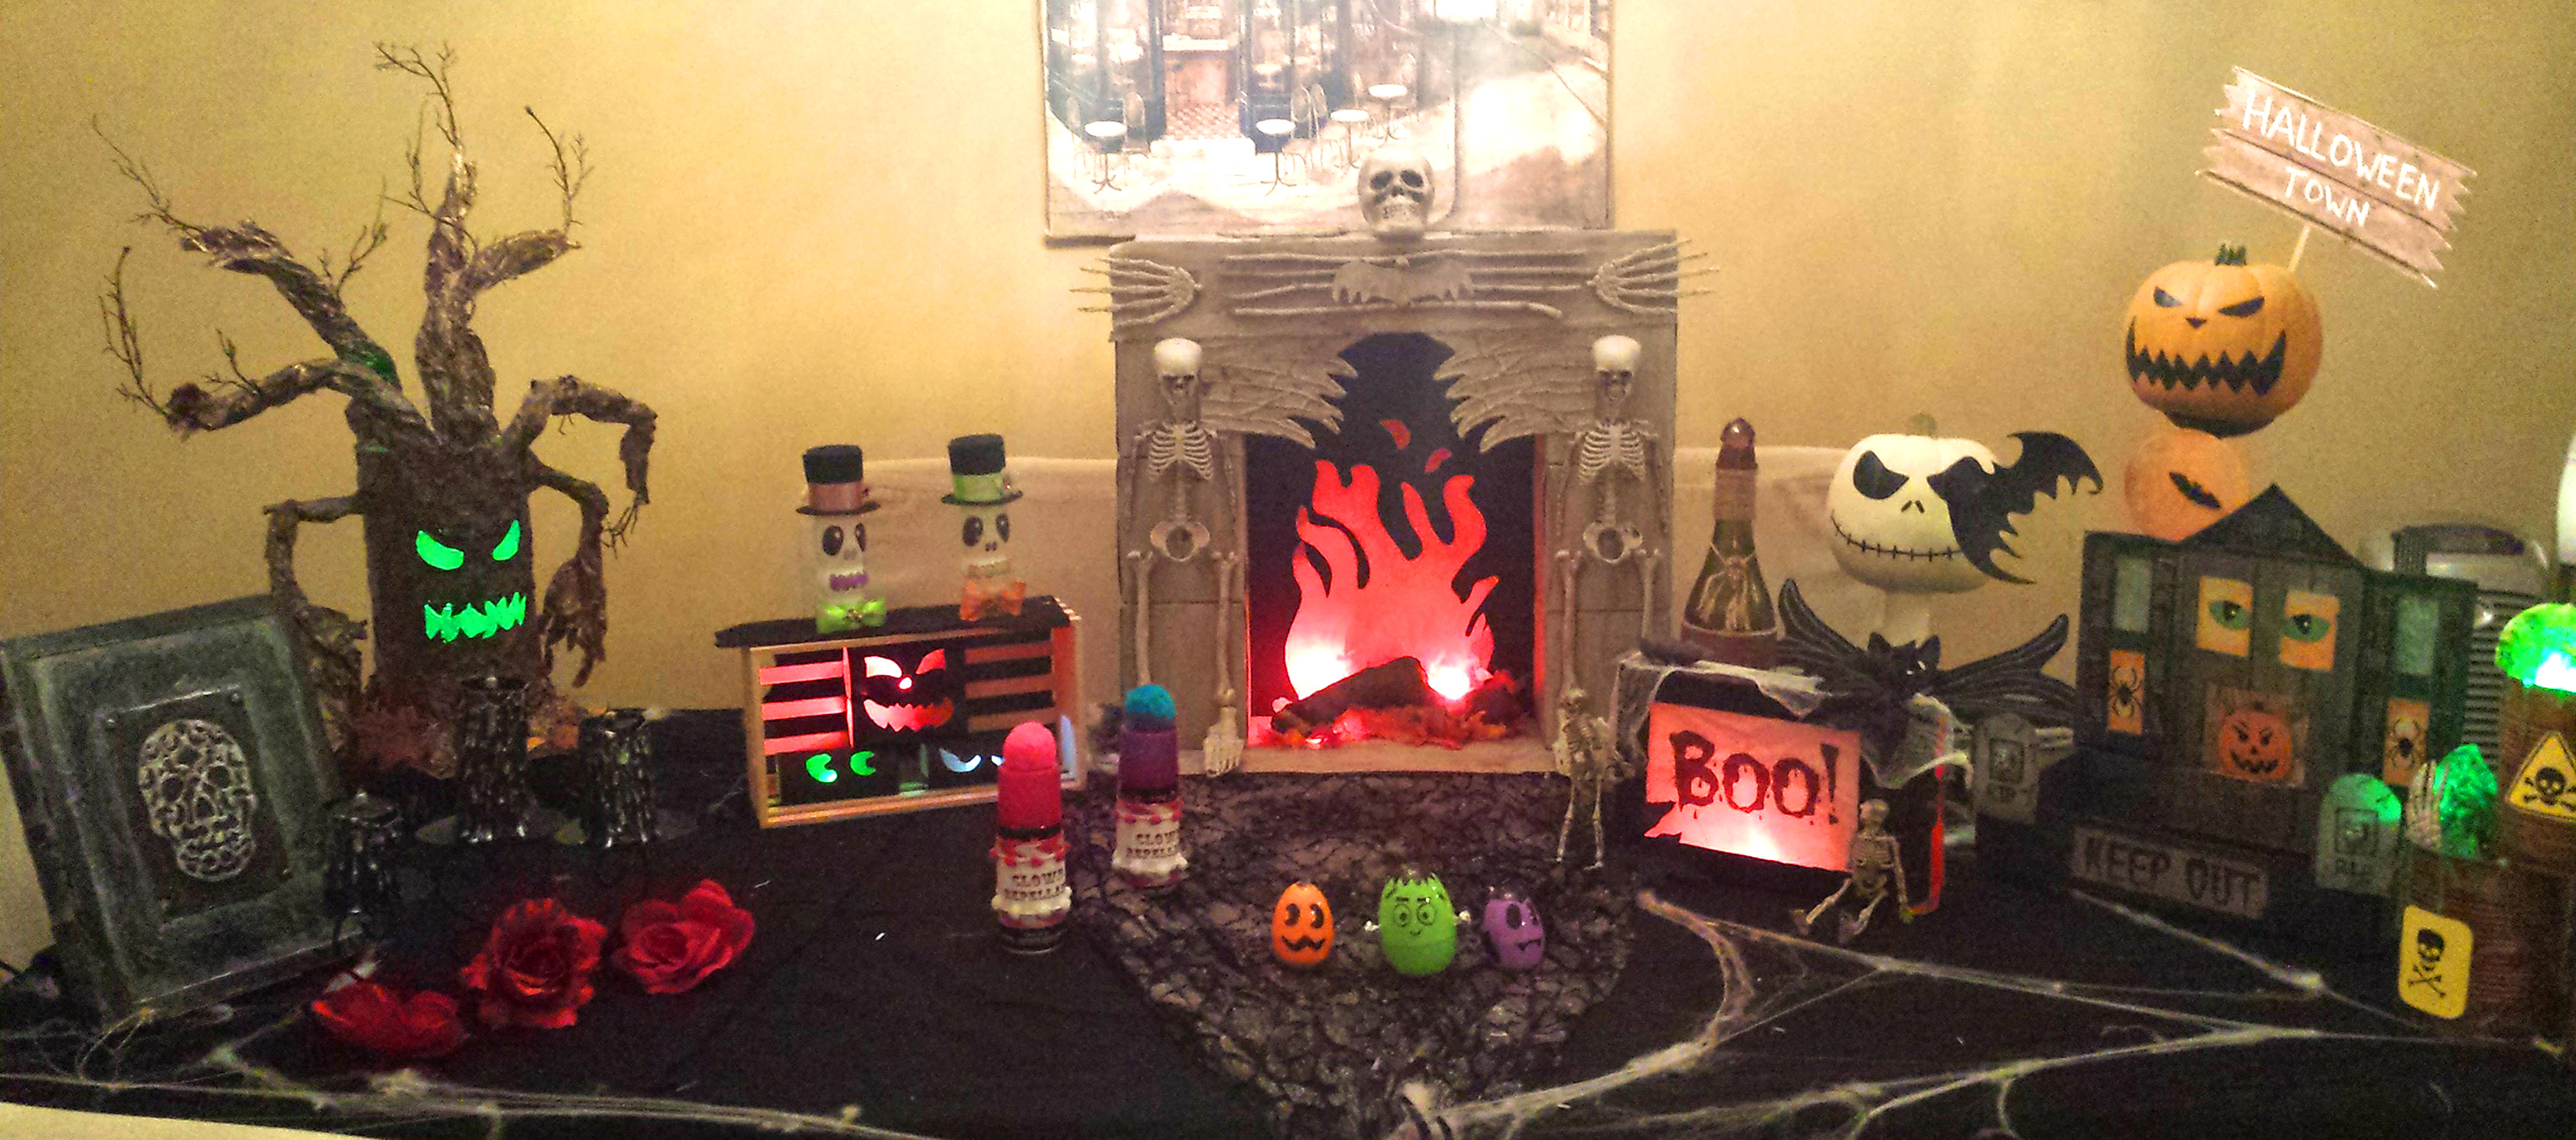 Halloween Decorations using Household Items - Gina Tepper